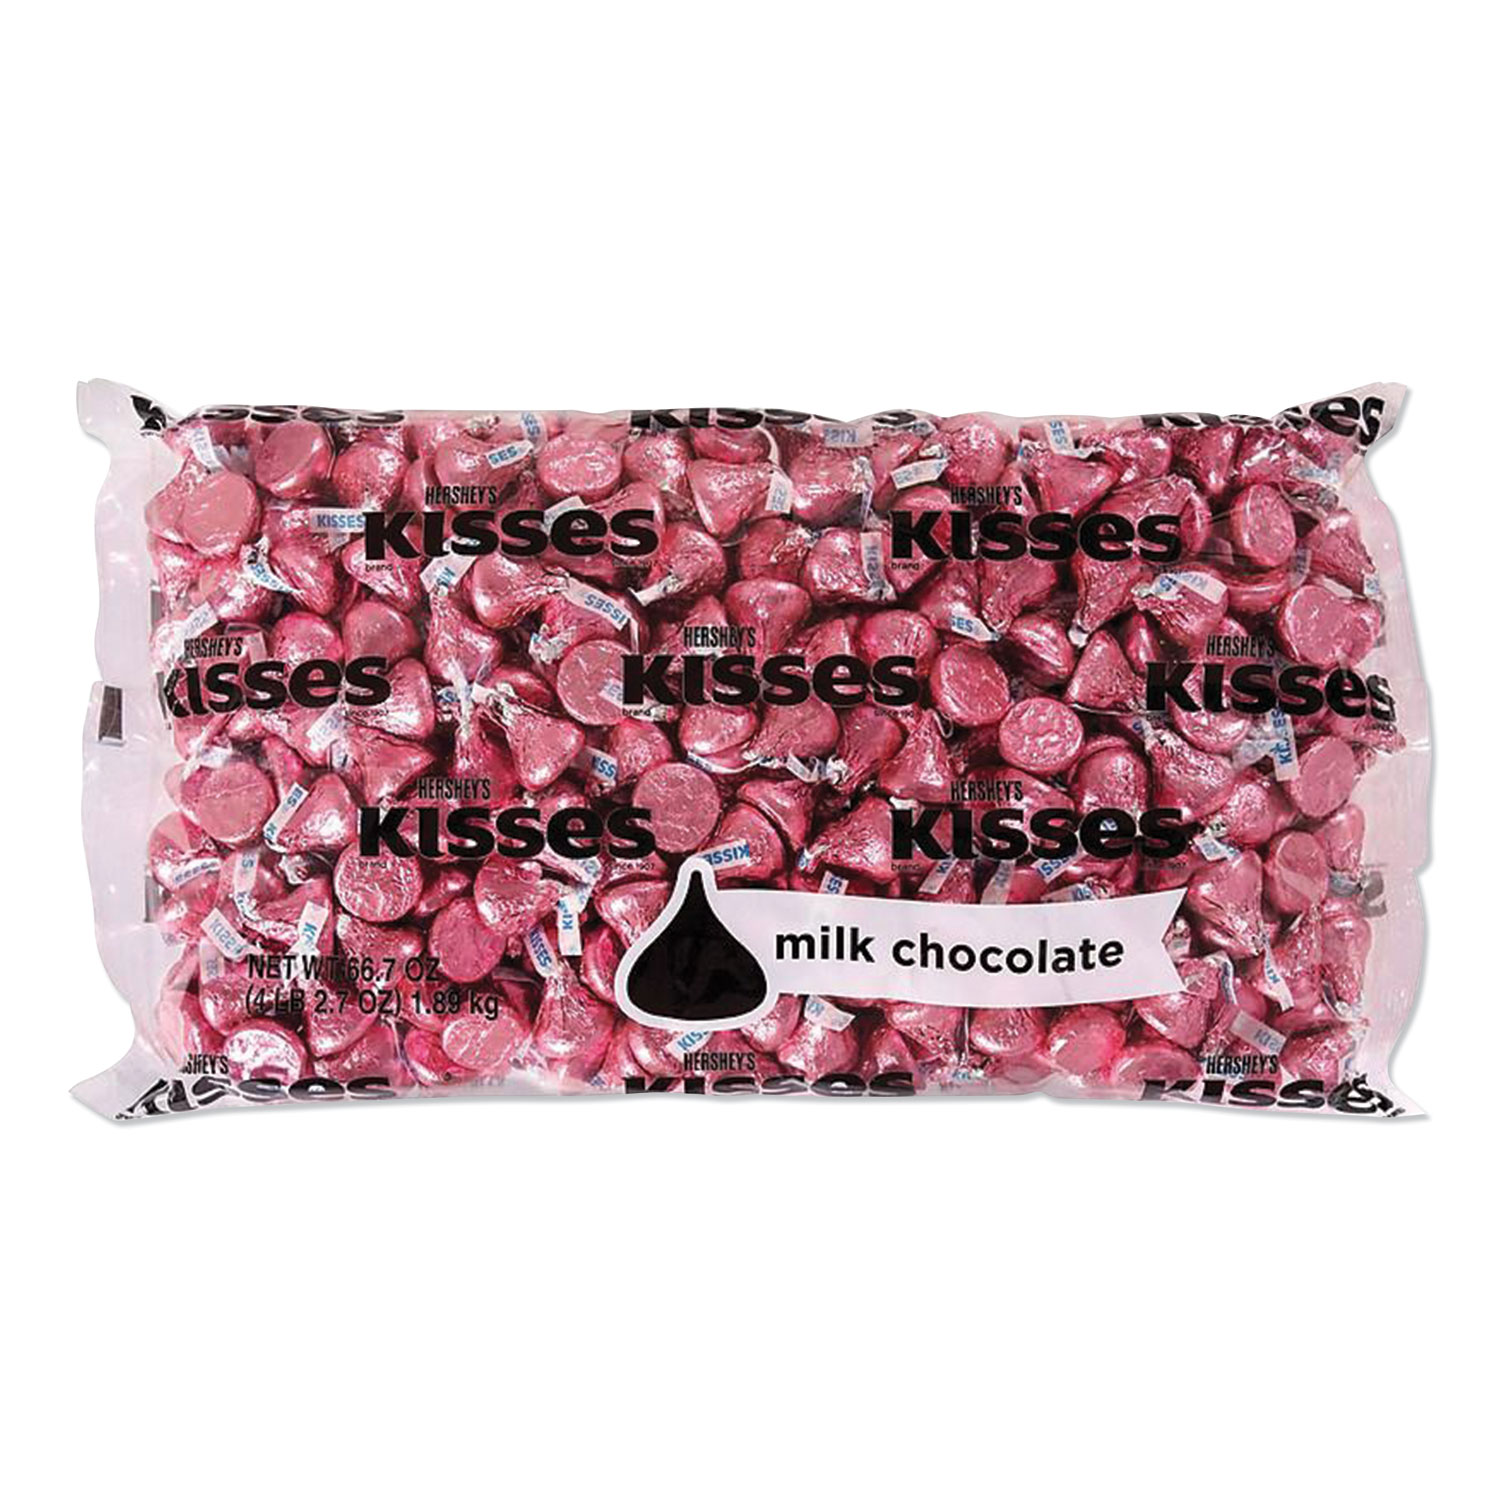  Hershey's HEC33434 KISSES, Milk Chocolate, Pink Wrappers, 66.7 oz Bag (HRS1504288) 